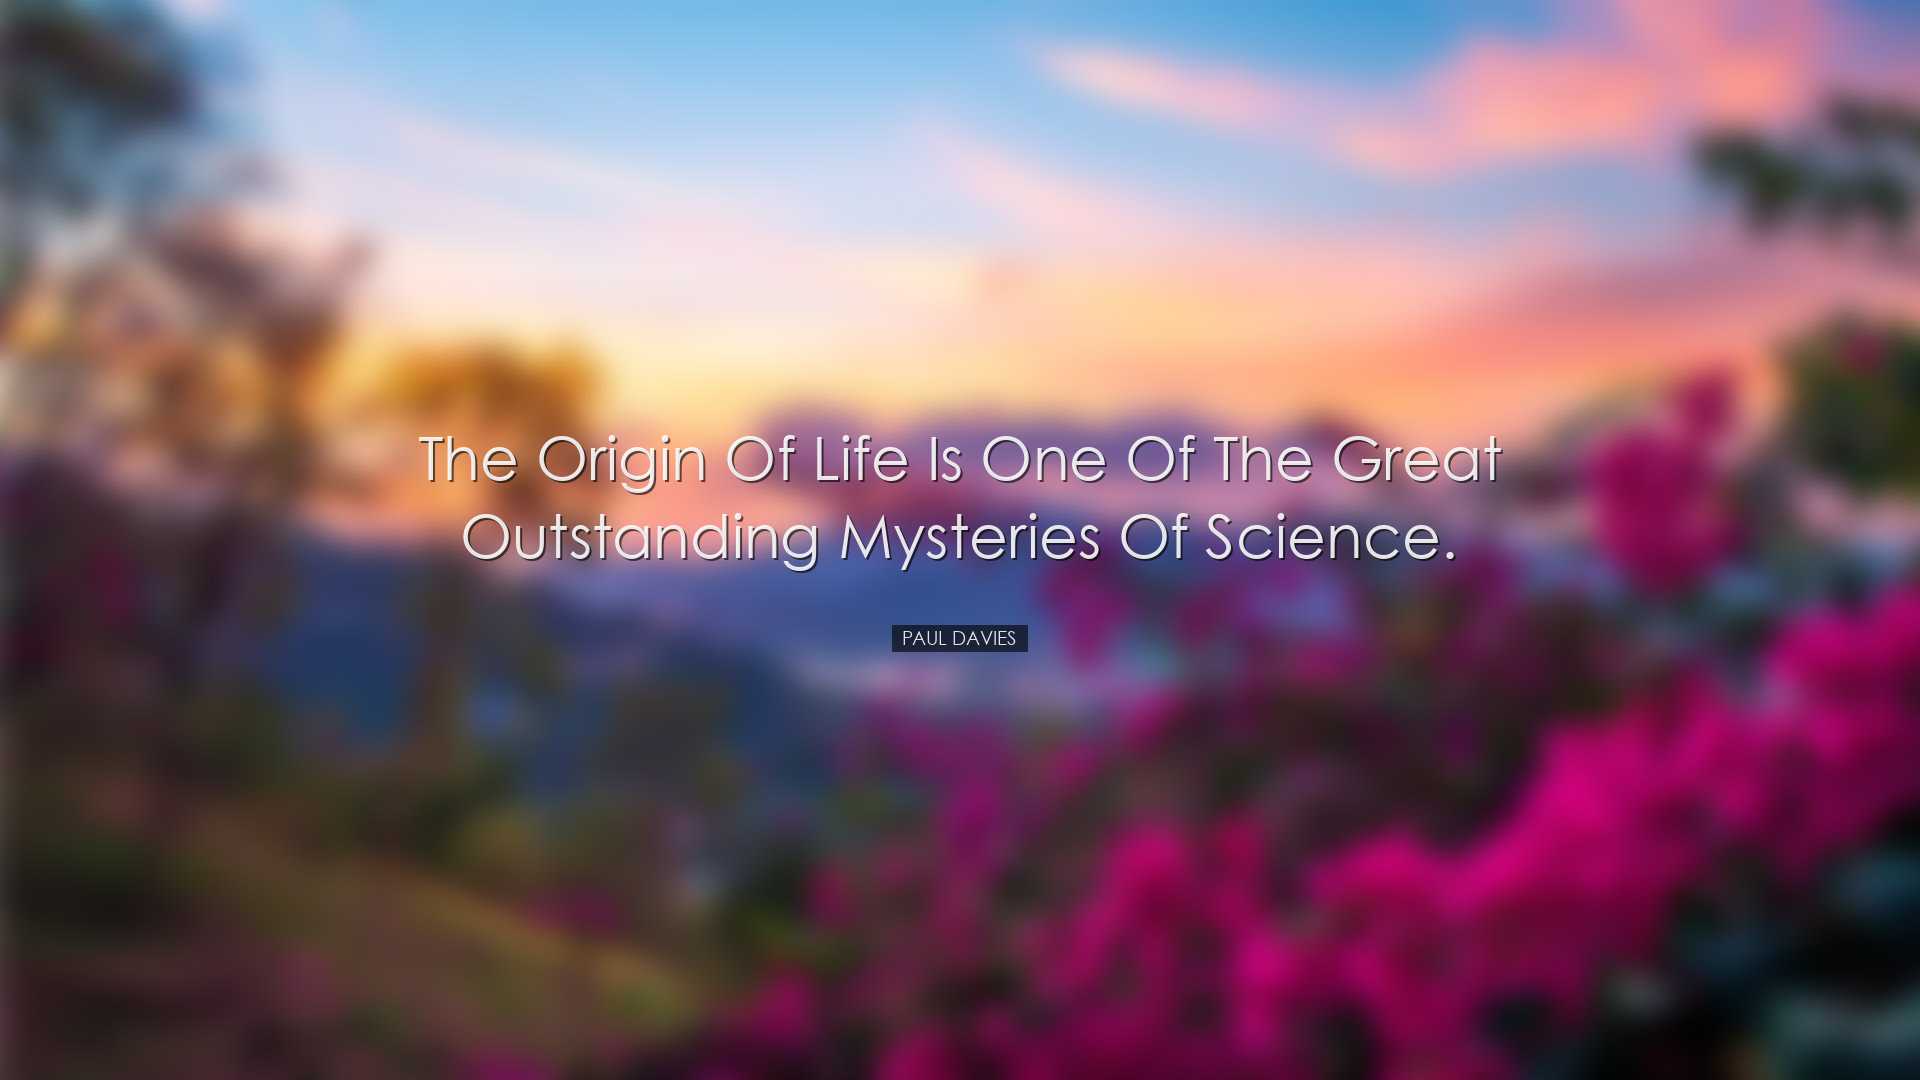 The origin of life is one of the great outstanding mysteries of sc